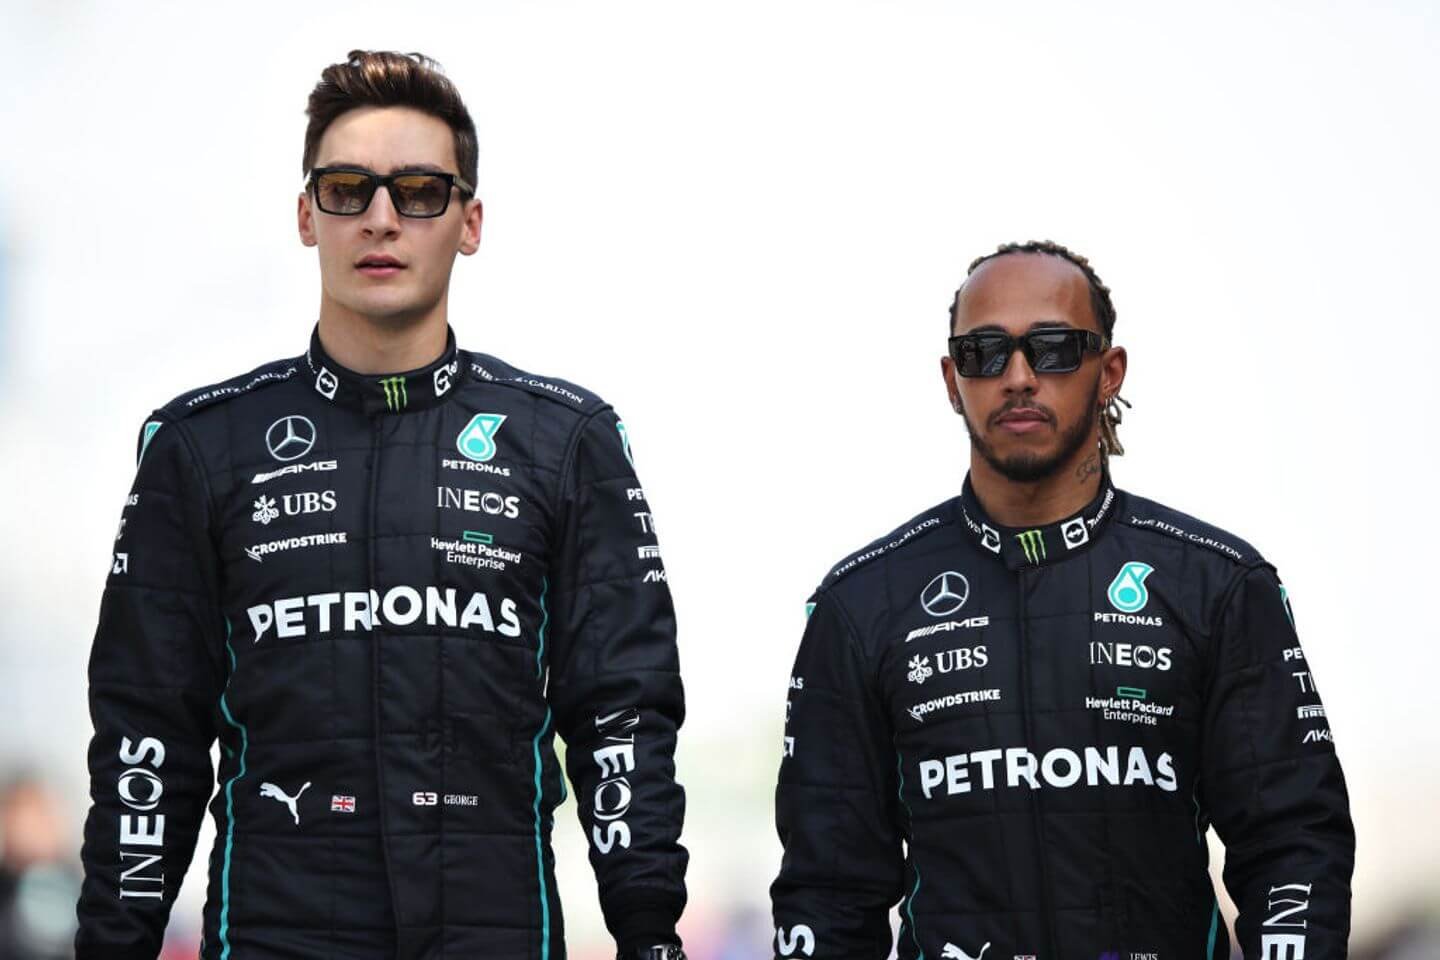 Who could Mercedes move for to replace Hamilton?